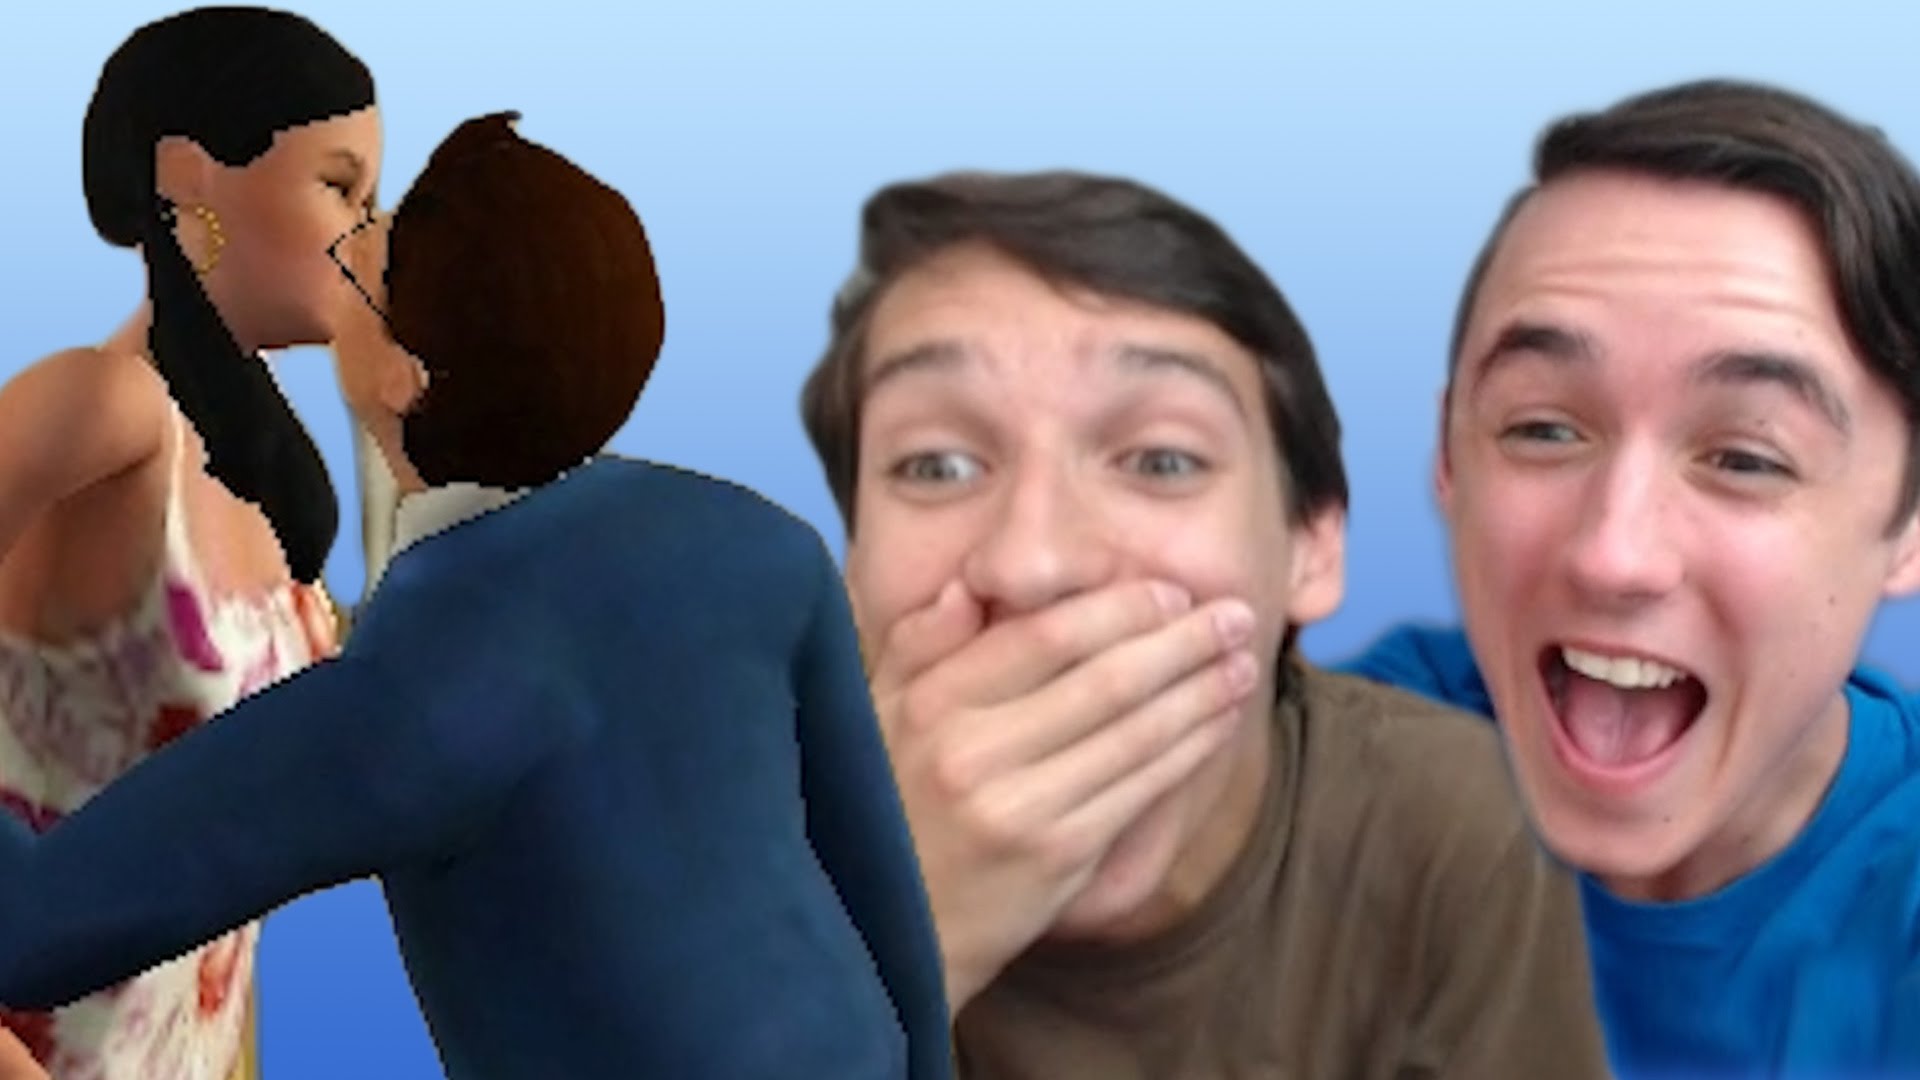 KISSING A MARRIED WOMAN - We Play The Sims 3 (#2) - YouTube